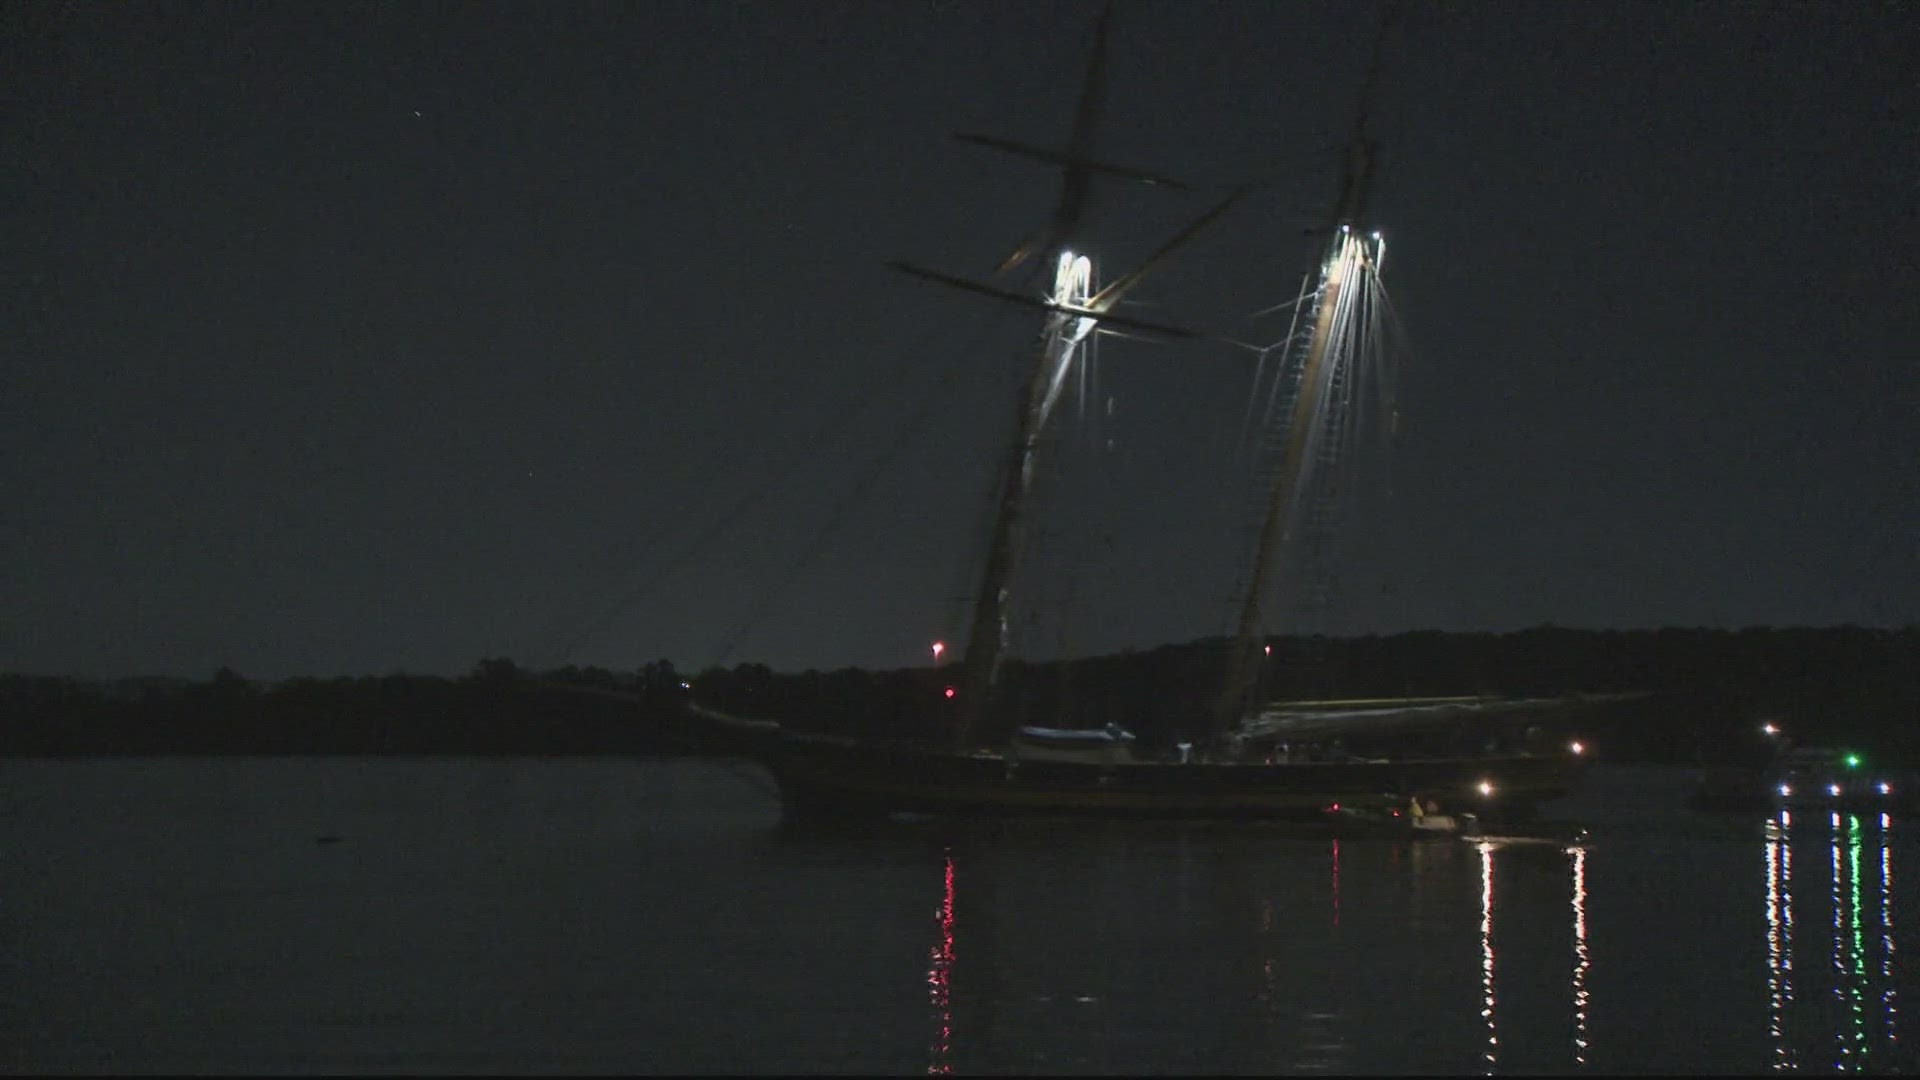 The replica of a 19th century ship similar to vessels that defended America in the War of 1812 will be free to access at the City of Alexandria's marina all weekend.